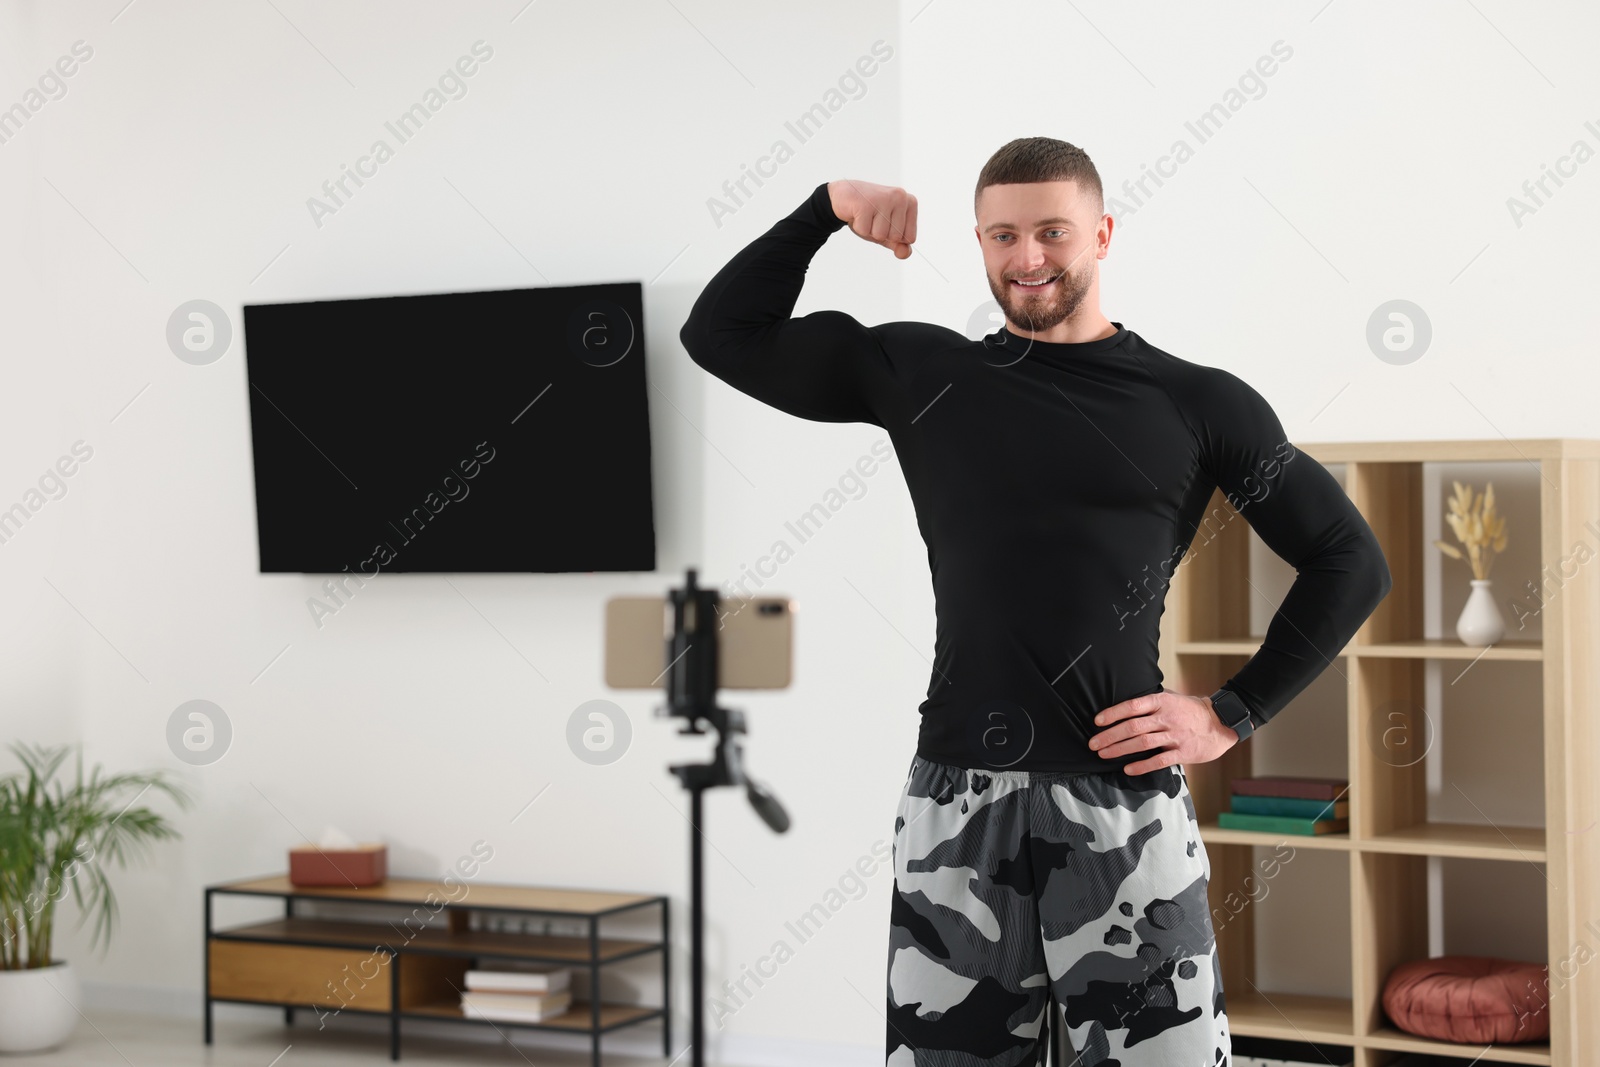 Photo of Trainer showing his muscles while streaming online fitness lesson with phone at home